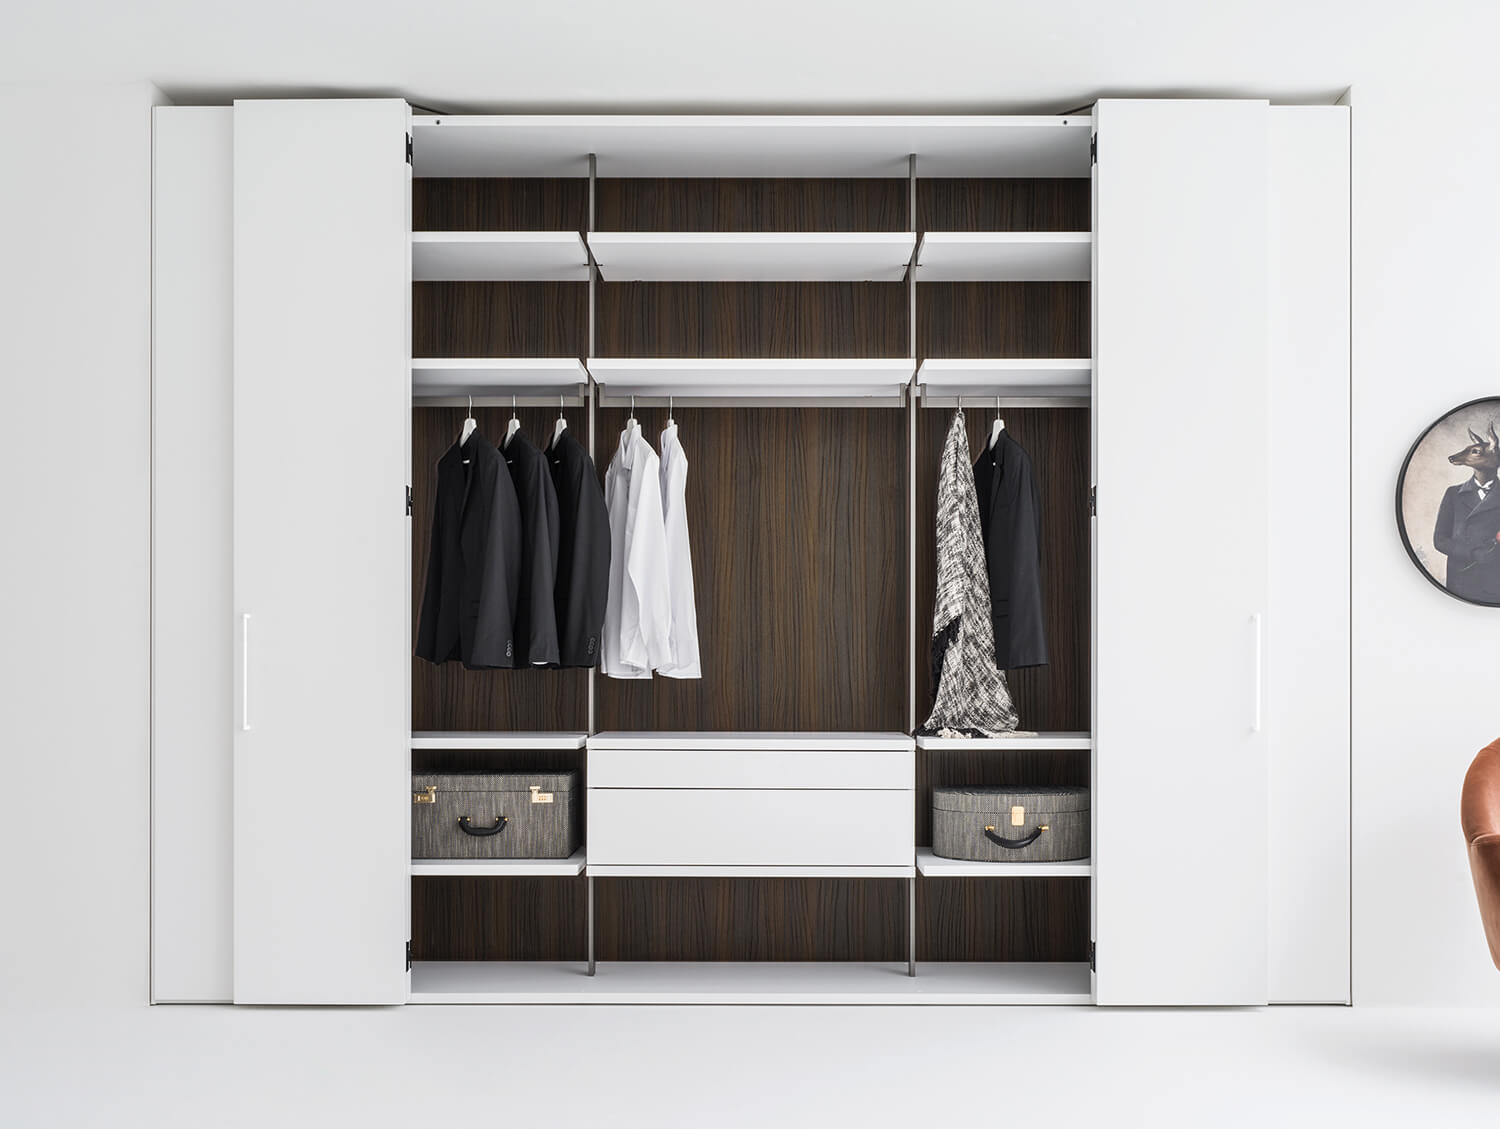 In this modern closet design, the space is divided into sections by uprights with no side panels. This makes it easier to move your clothes around.